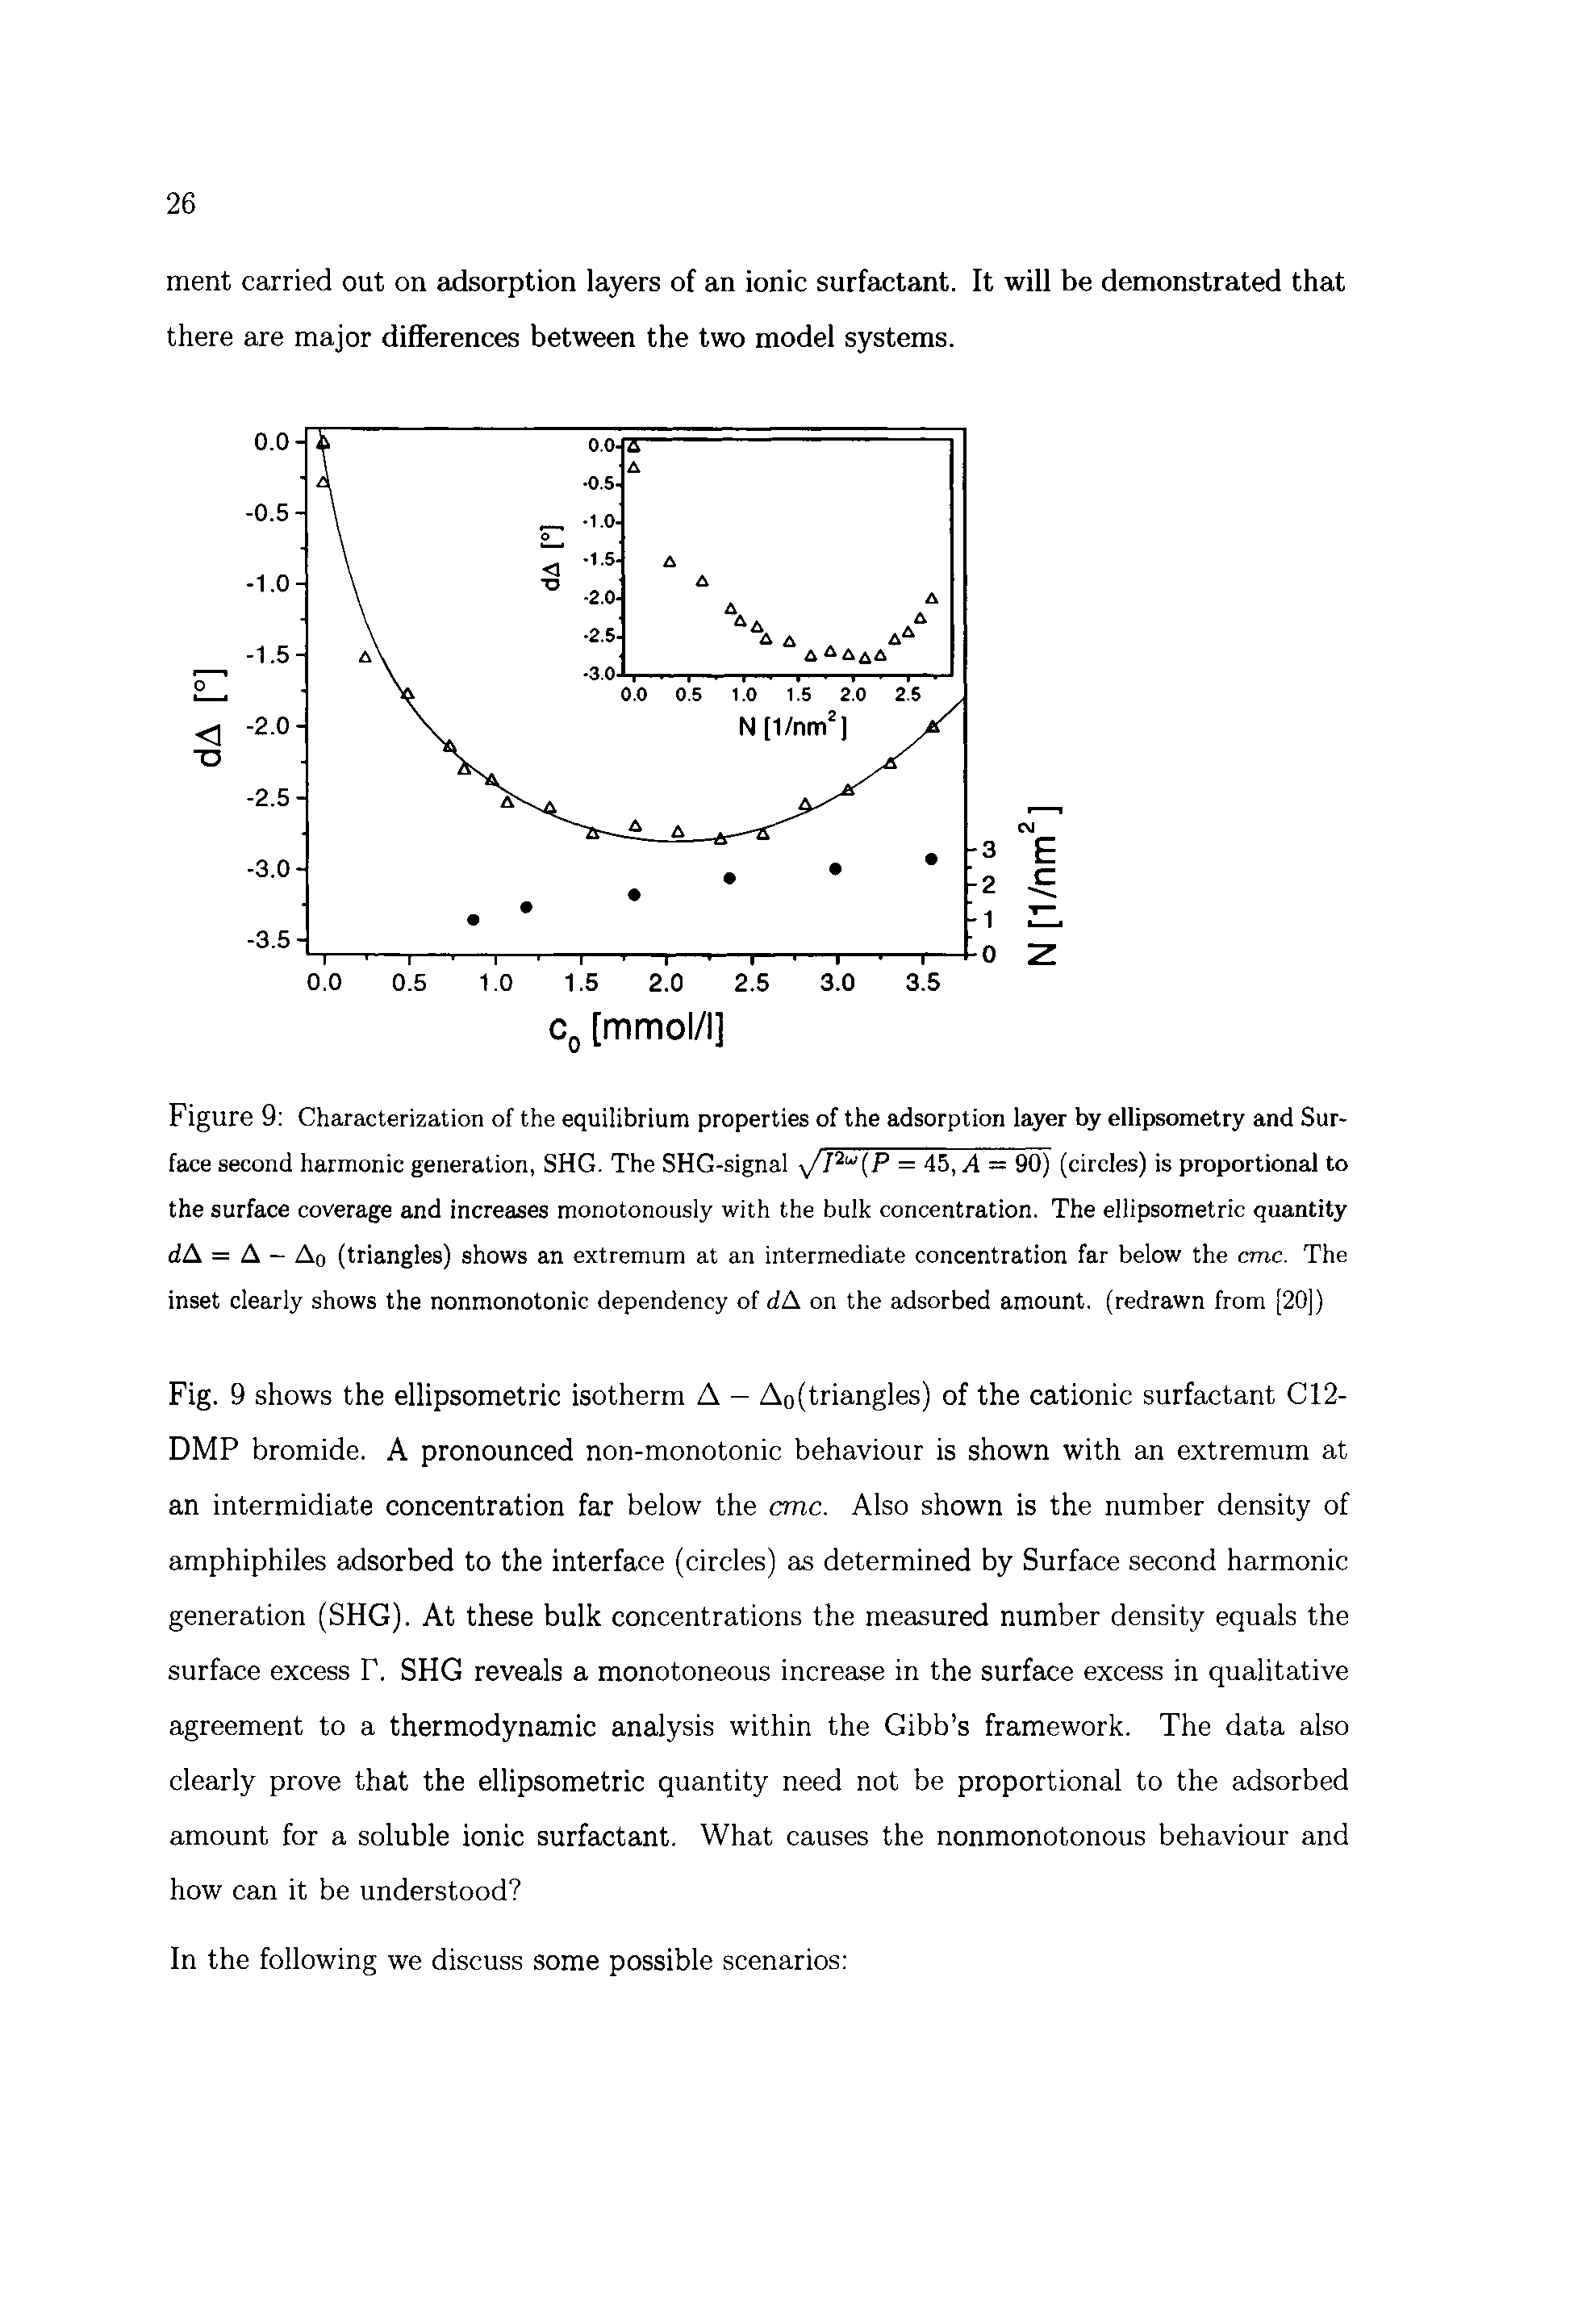 Figure 9 Characterization of the equilibrium properties of the adsorption layer by ellipsometry and Surface second harmonic generation, SHG. The SHG-signal I (P = 45, d = 90) (circles) is proportional to the surface coverage and increases monotonously with the bulk concentration. The ellipsometric quantity dA = A - Ao (triangles) shows an extremum at an intermediate concentration far below the cmc. The inset clearly shows the nonmonotonic dependency of dA on the adsorbed amount, (redrawn from (20 )...